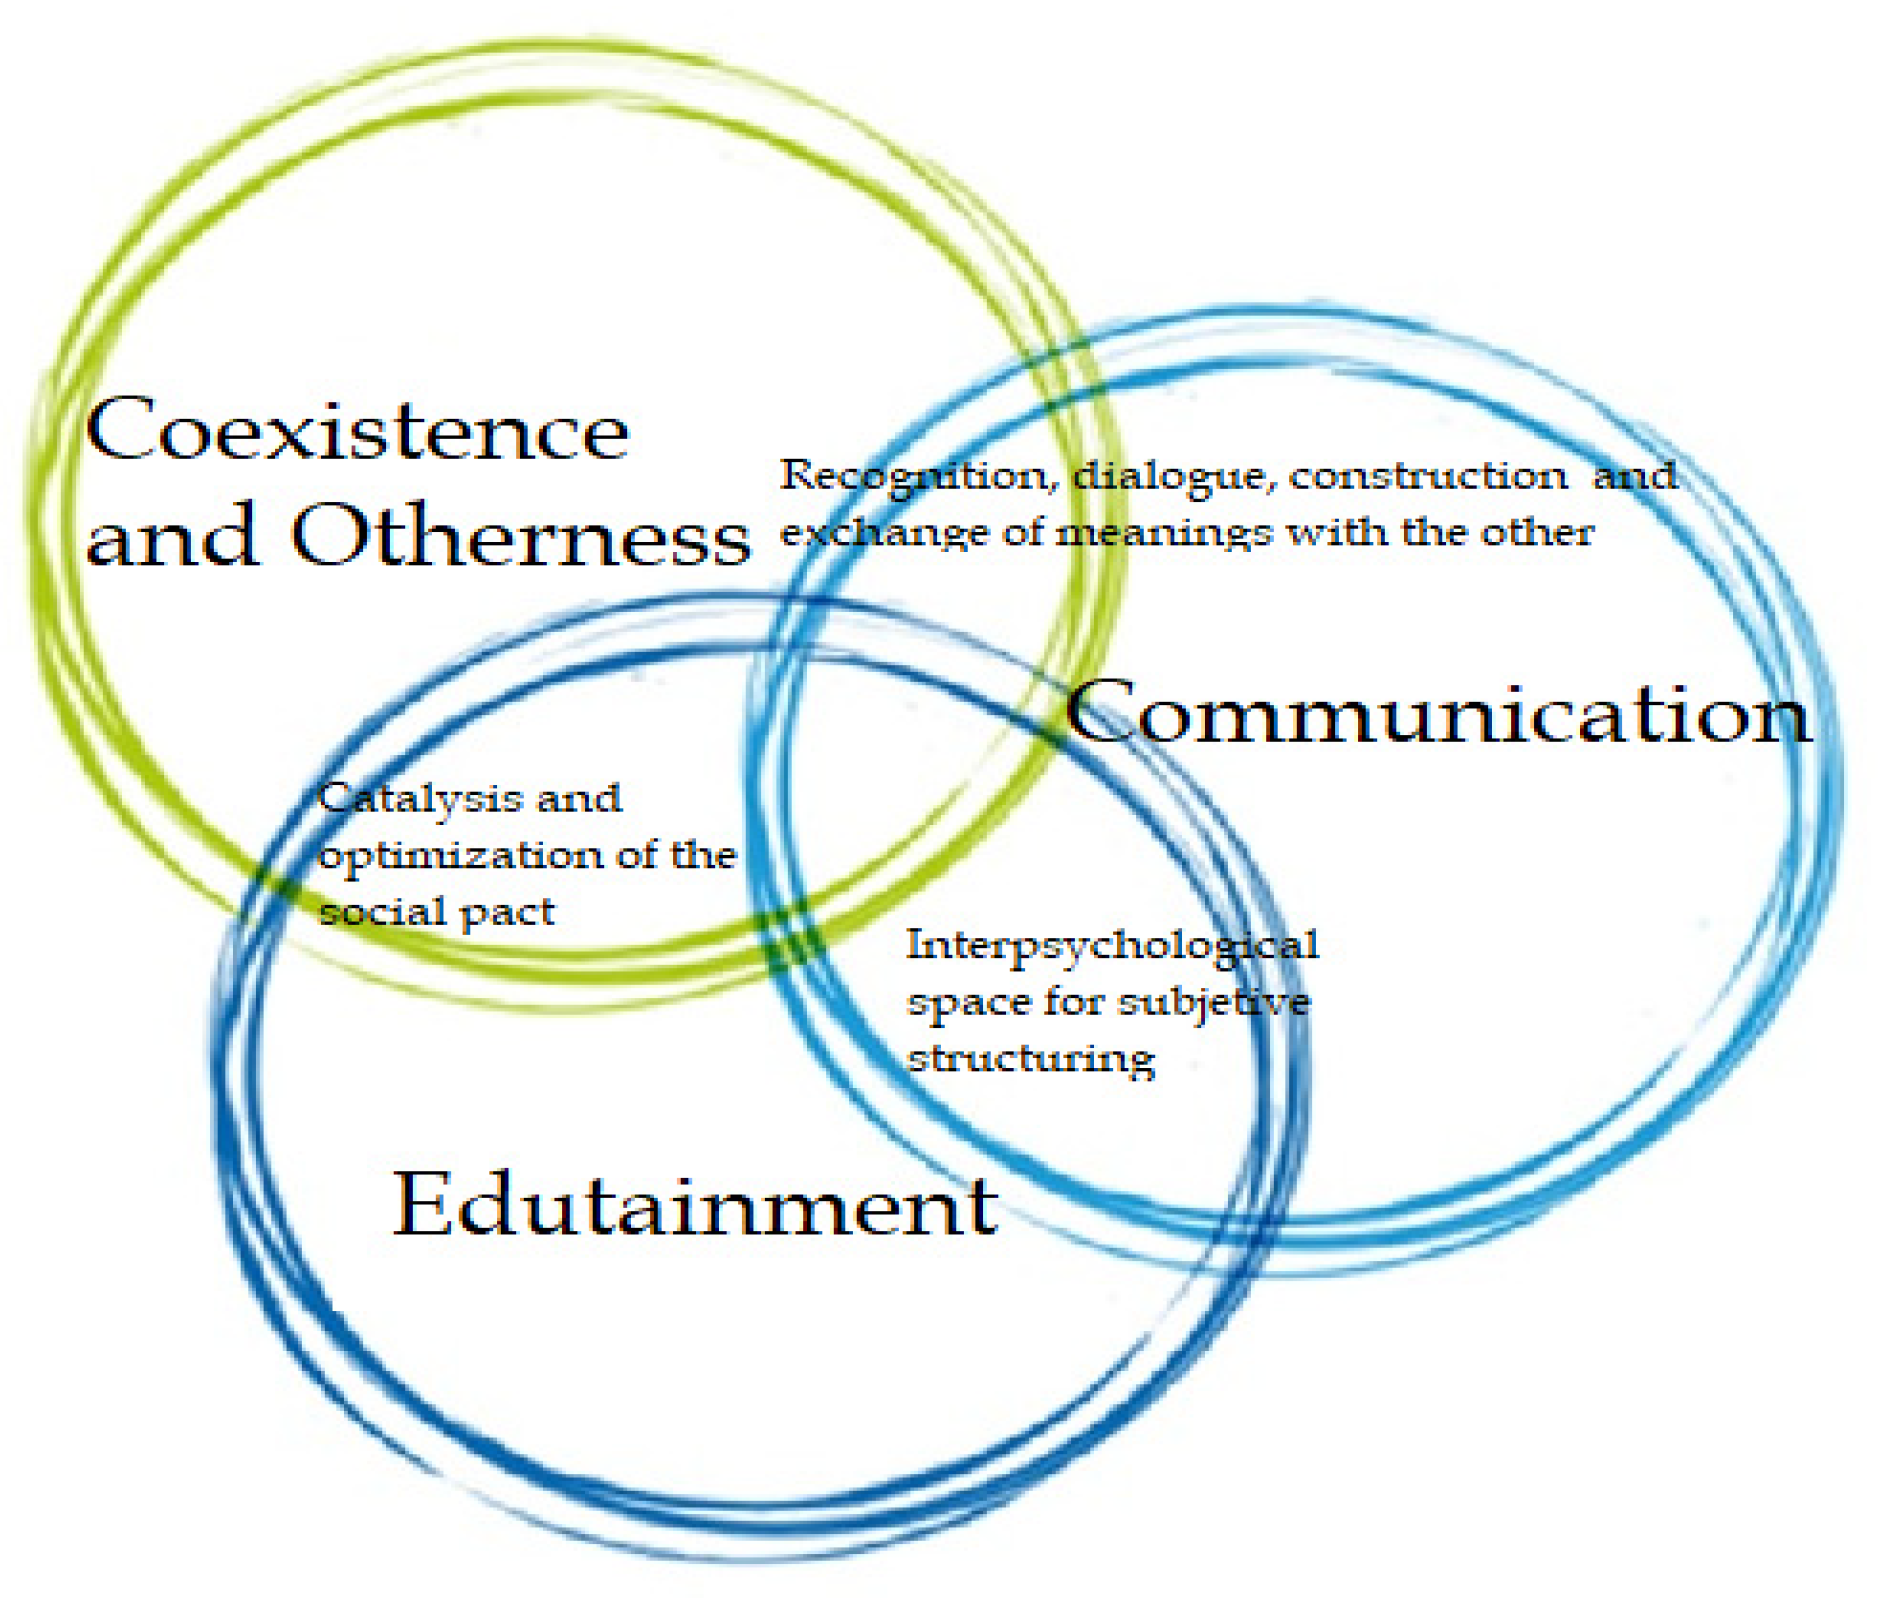 Social Sciences Free Full-Text 2.0 Society Convergences Coexistence, Otherness, Communication and Edutainment